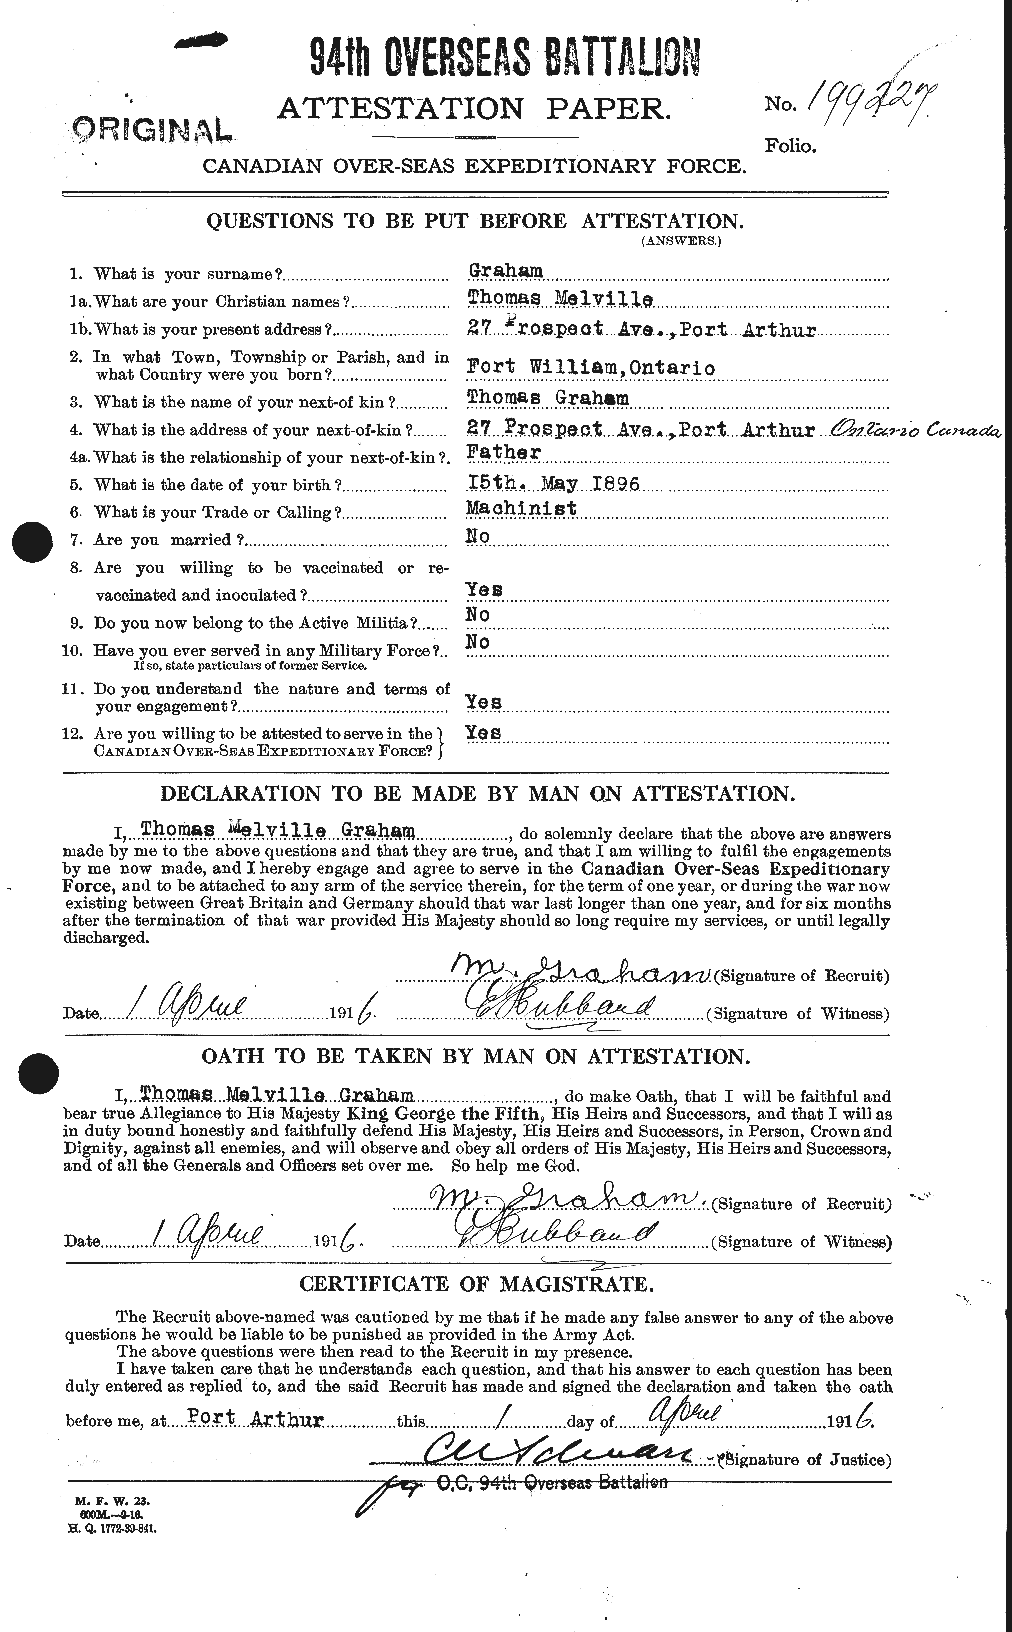 Personnel Records of the First World War - CEF 359523a